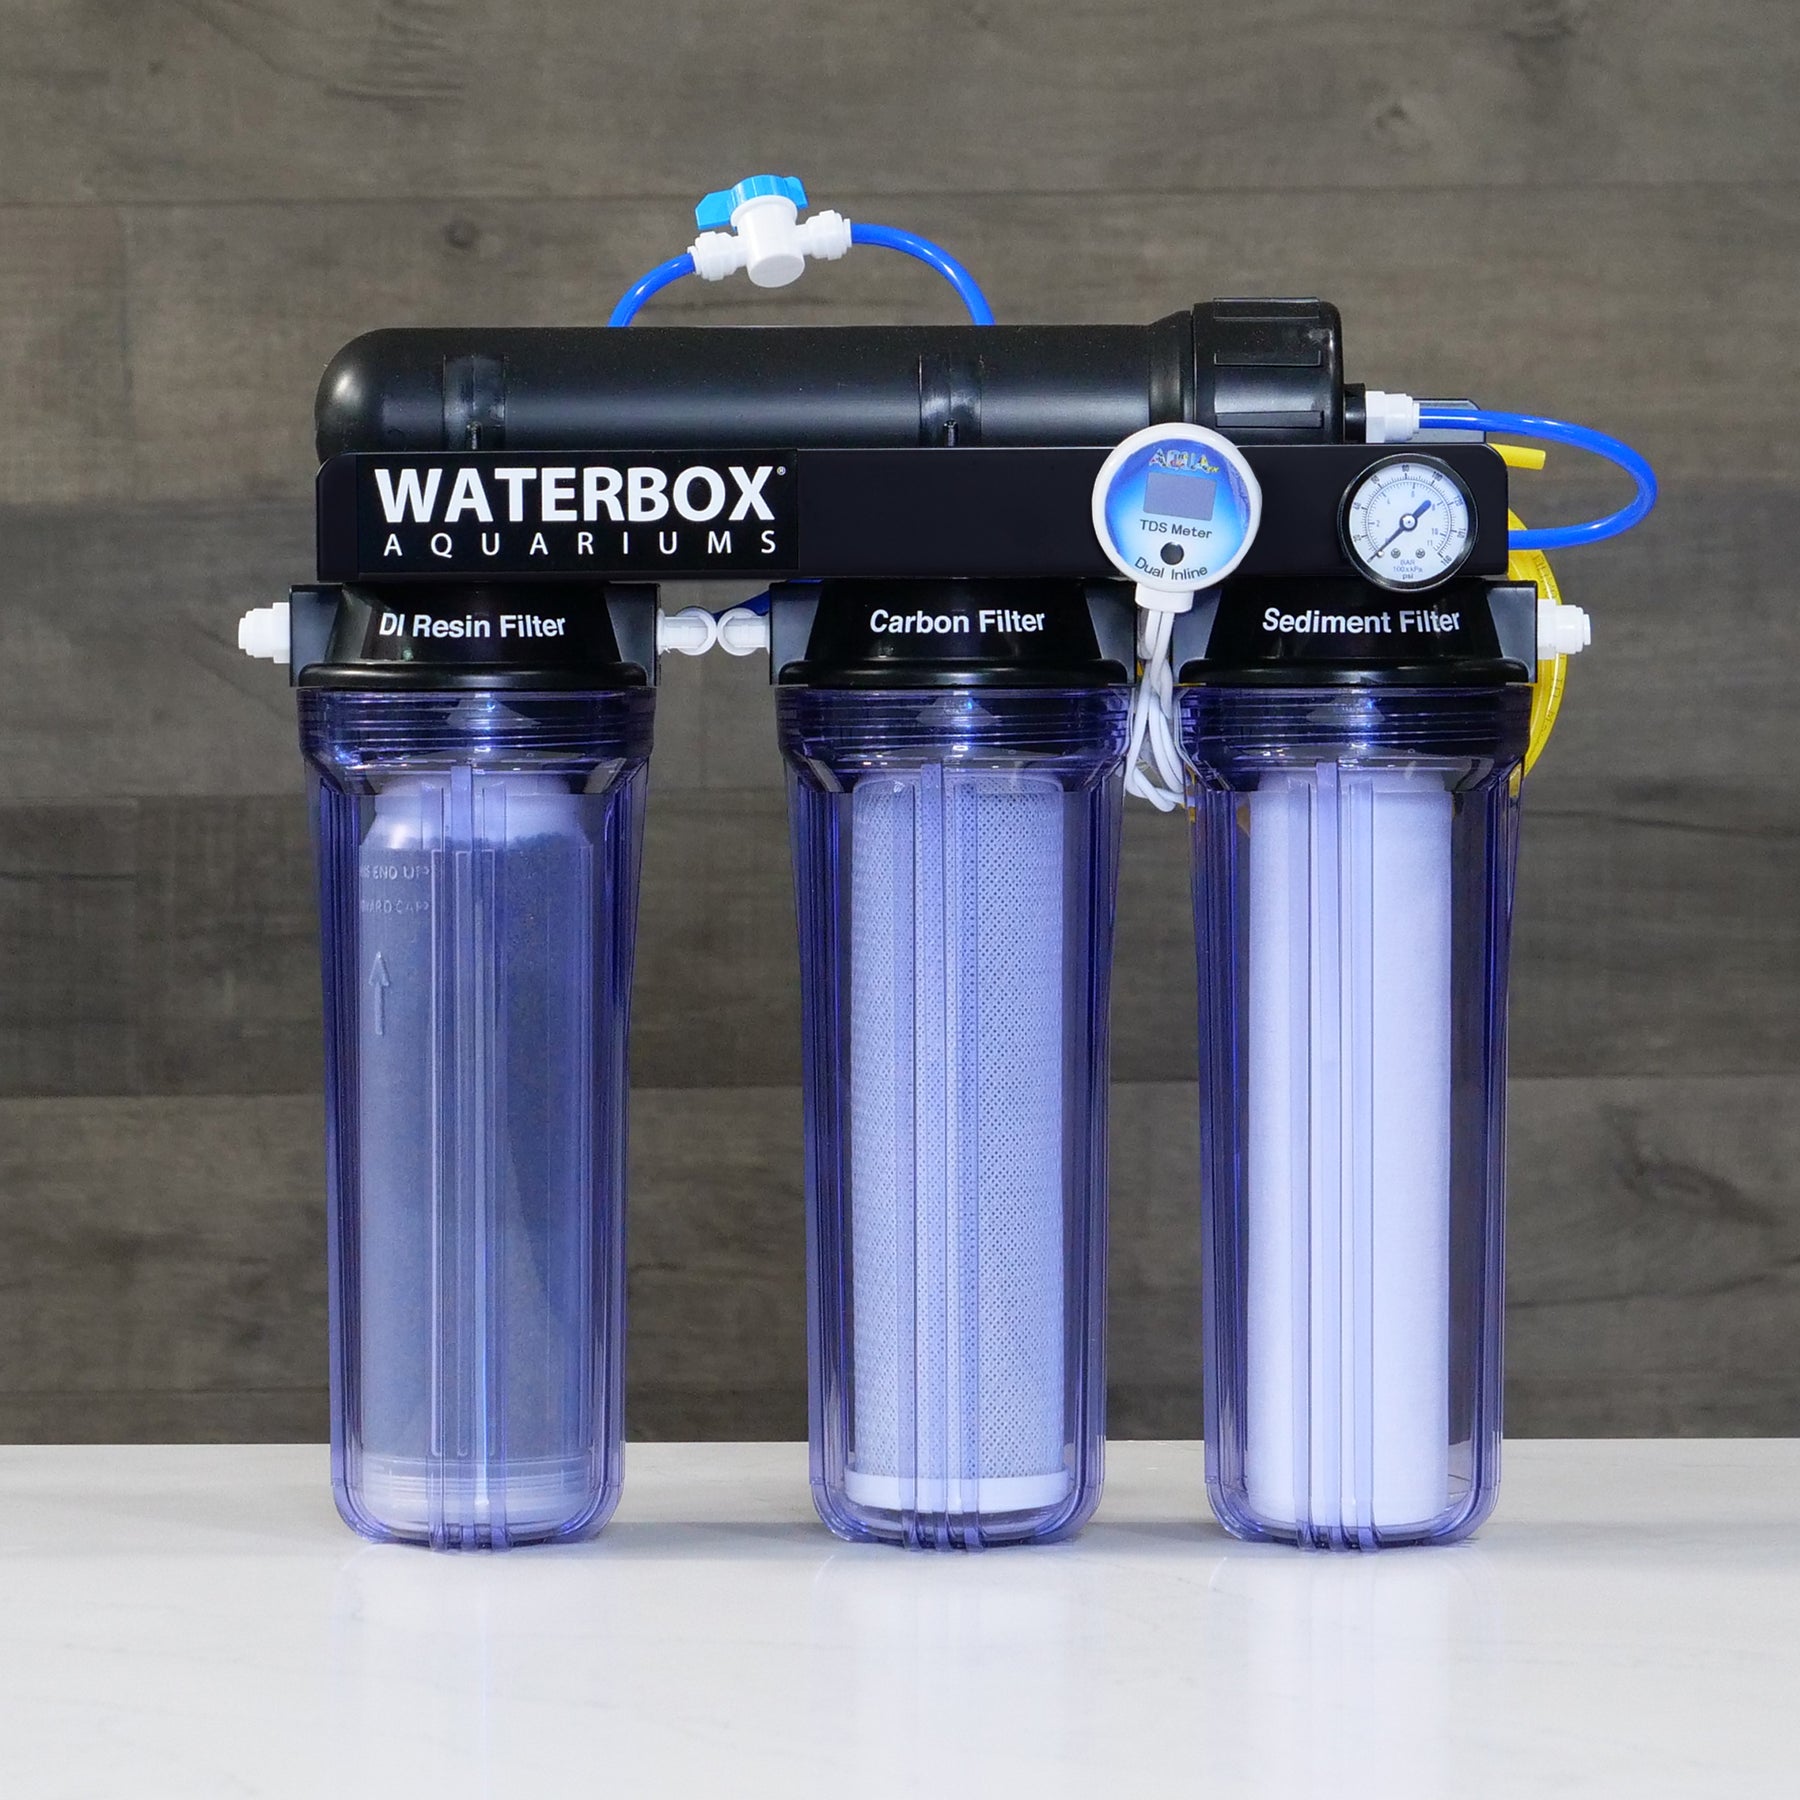 Reverse osmosis for aquariums: Do you need it?